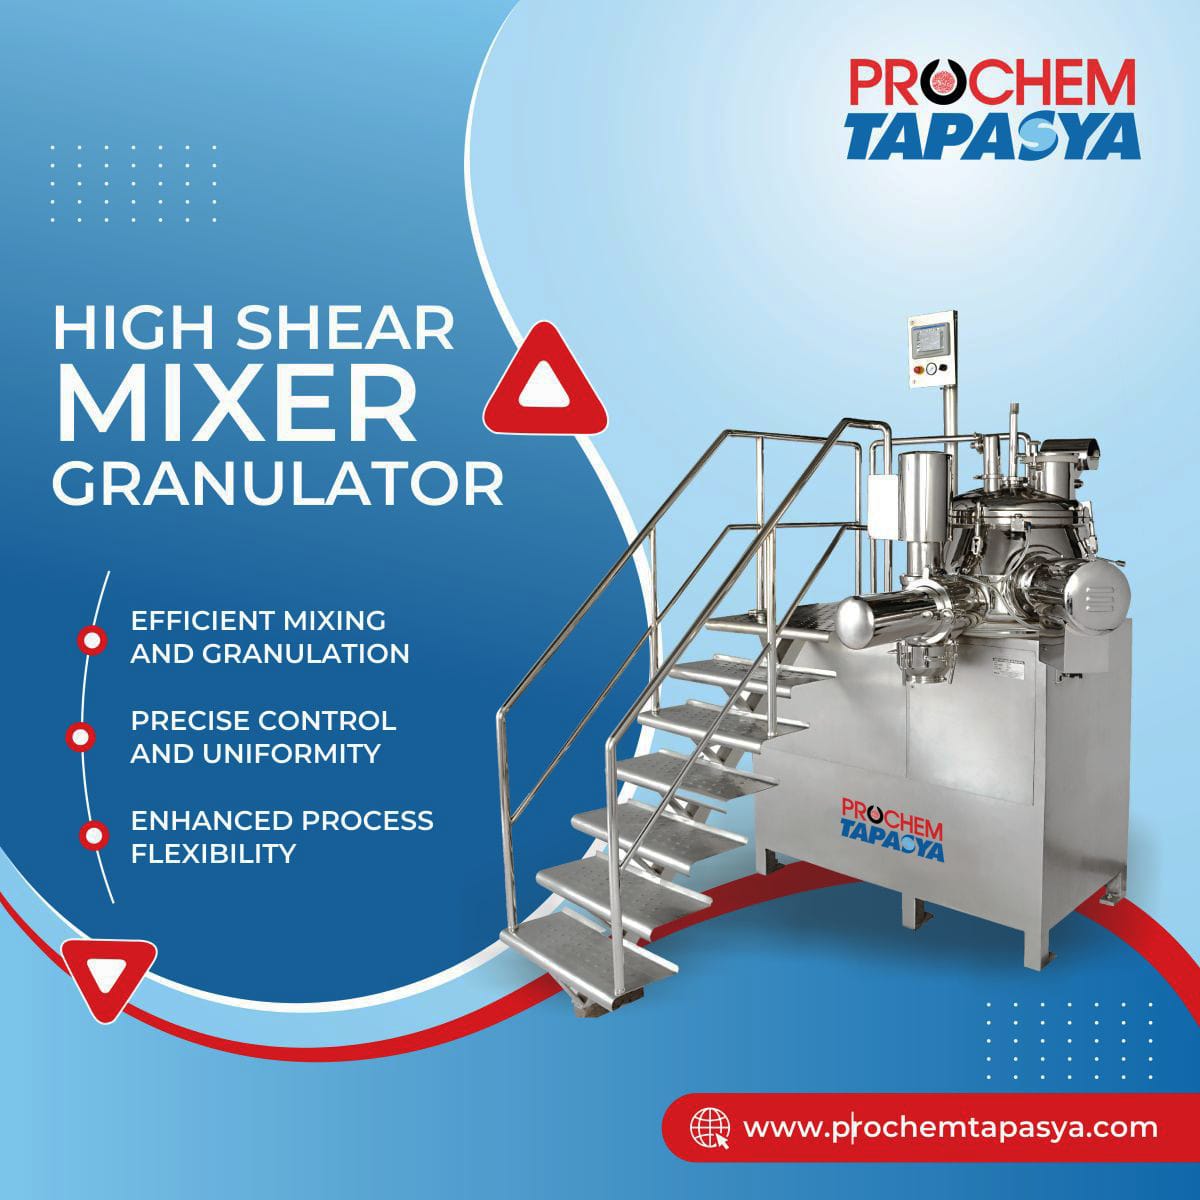 Experience superior mixing and granulation with our High Shear Mixer Granulator. Achieve precise control, uniformity, and enhanced process flexibility. Elevate your production capabilities today!

#HighShearMixer #EfficientMixing #Granulation #ProcessFlexibility #ProchemTapasya